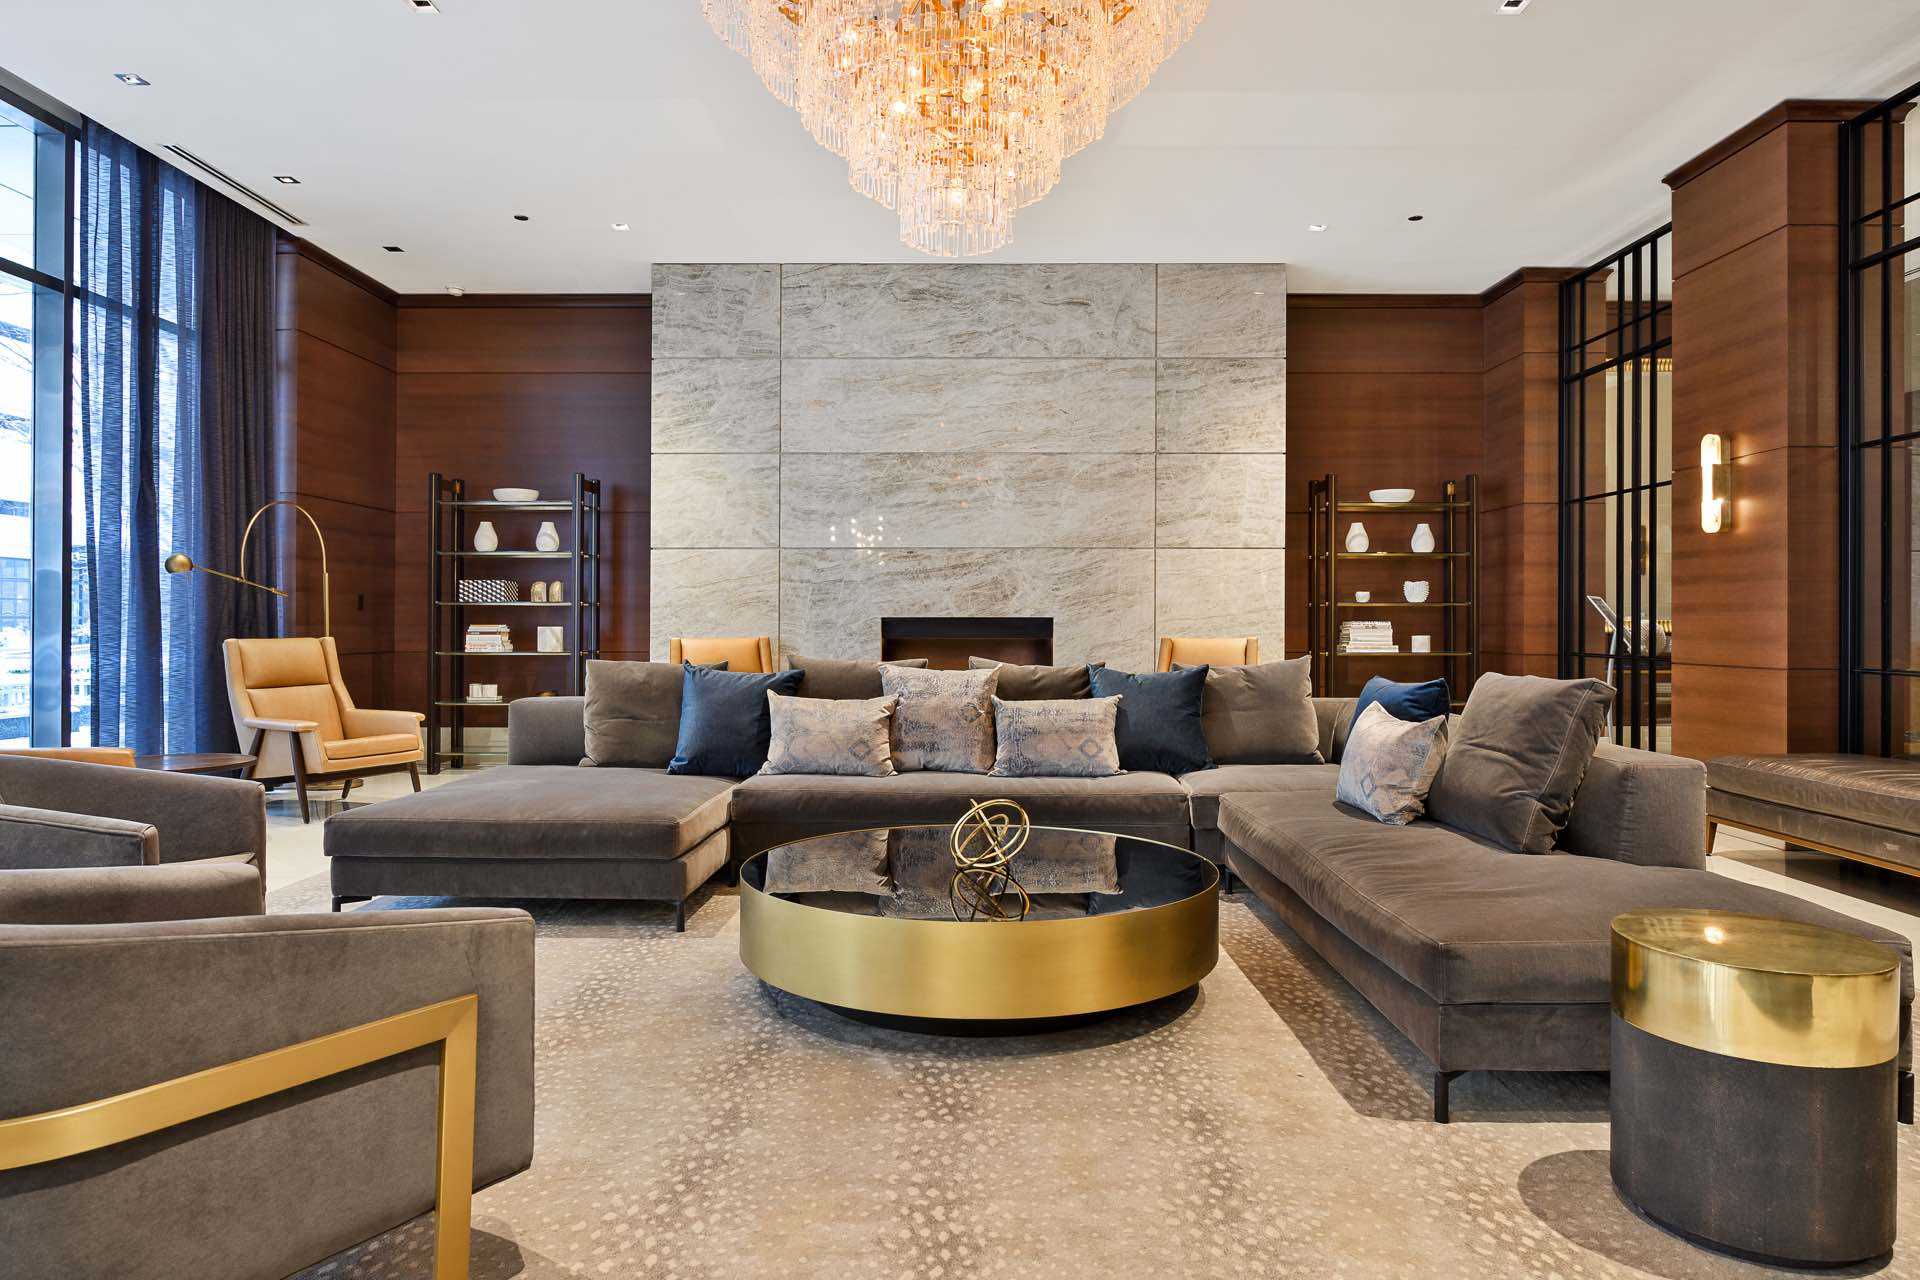 The Lobby Welcomes You Home In Grand Style